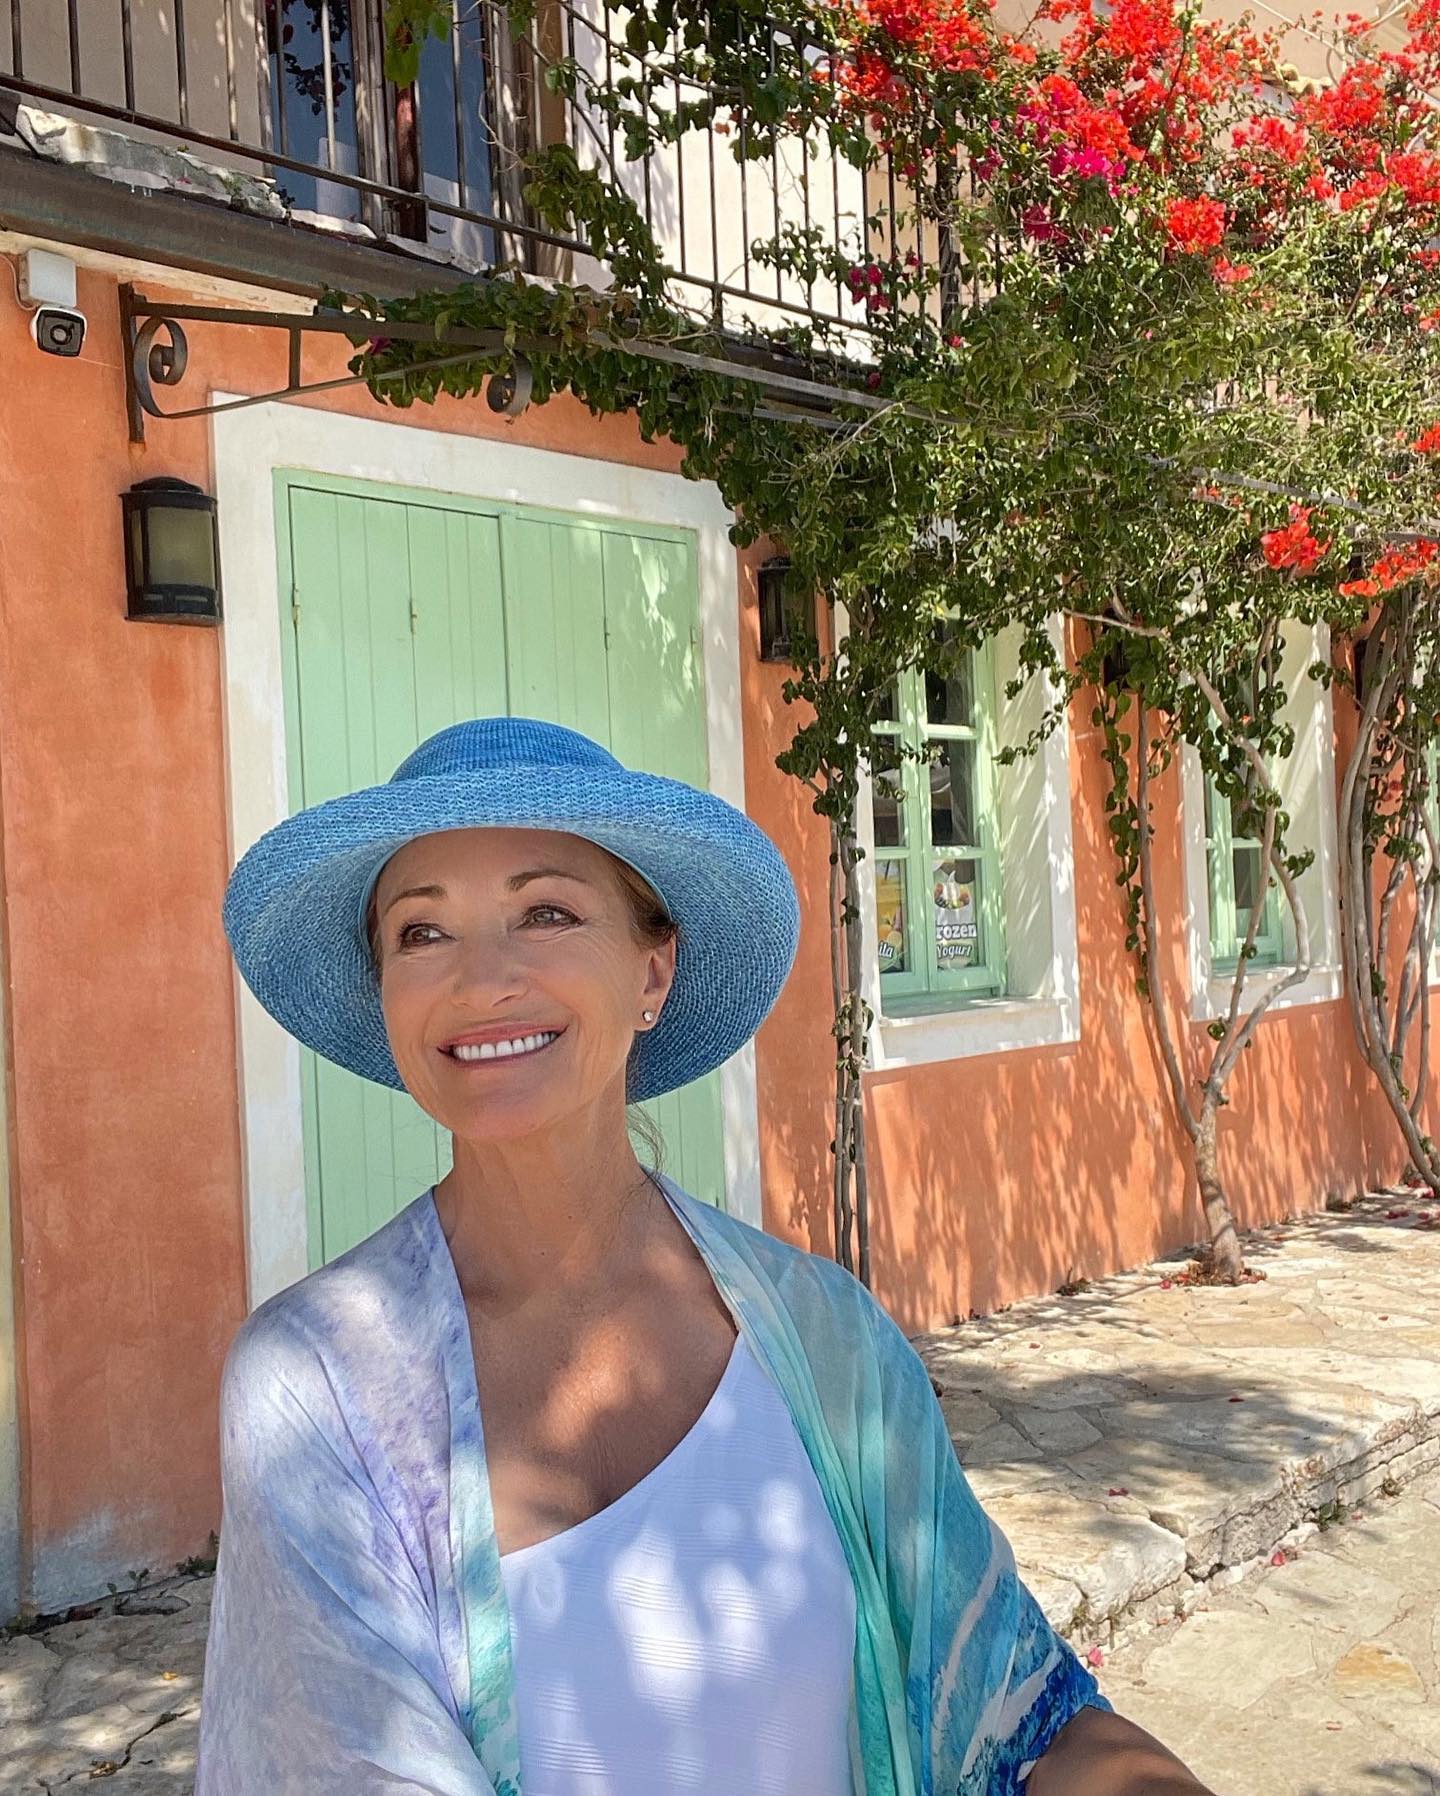 Photo by Jane Seymour OBE in Greece. May be an image of 1 person hat parasol headscarf sarong and